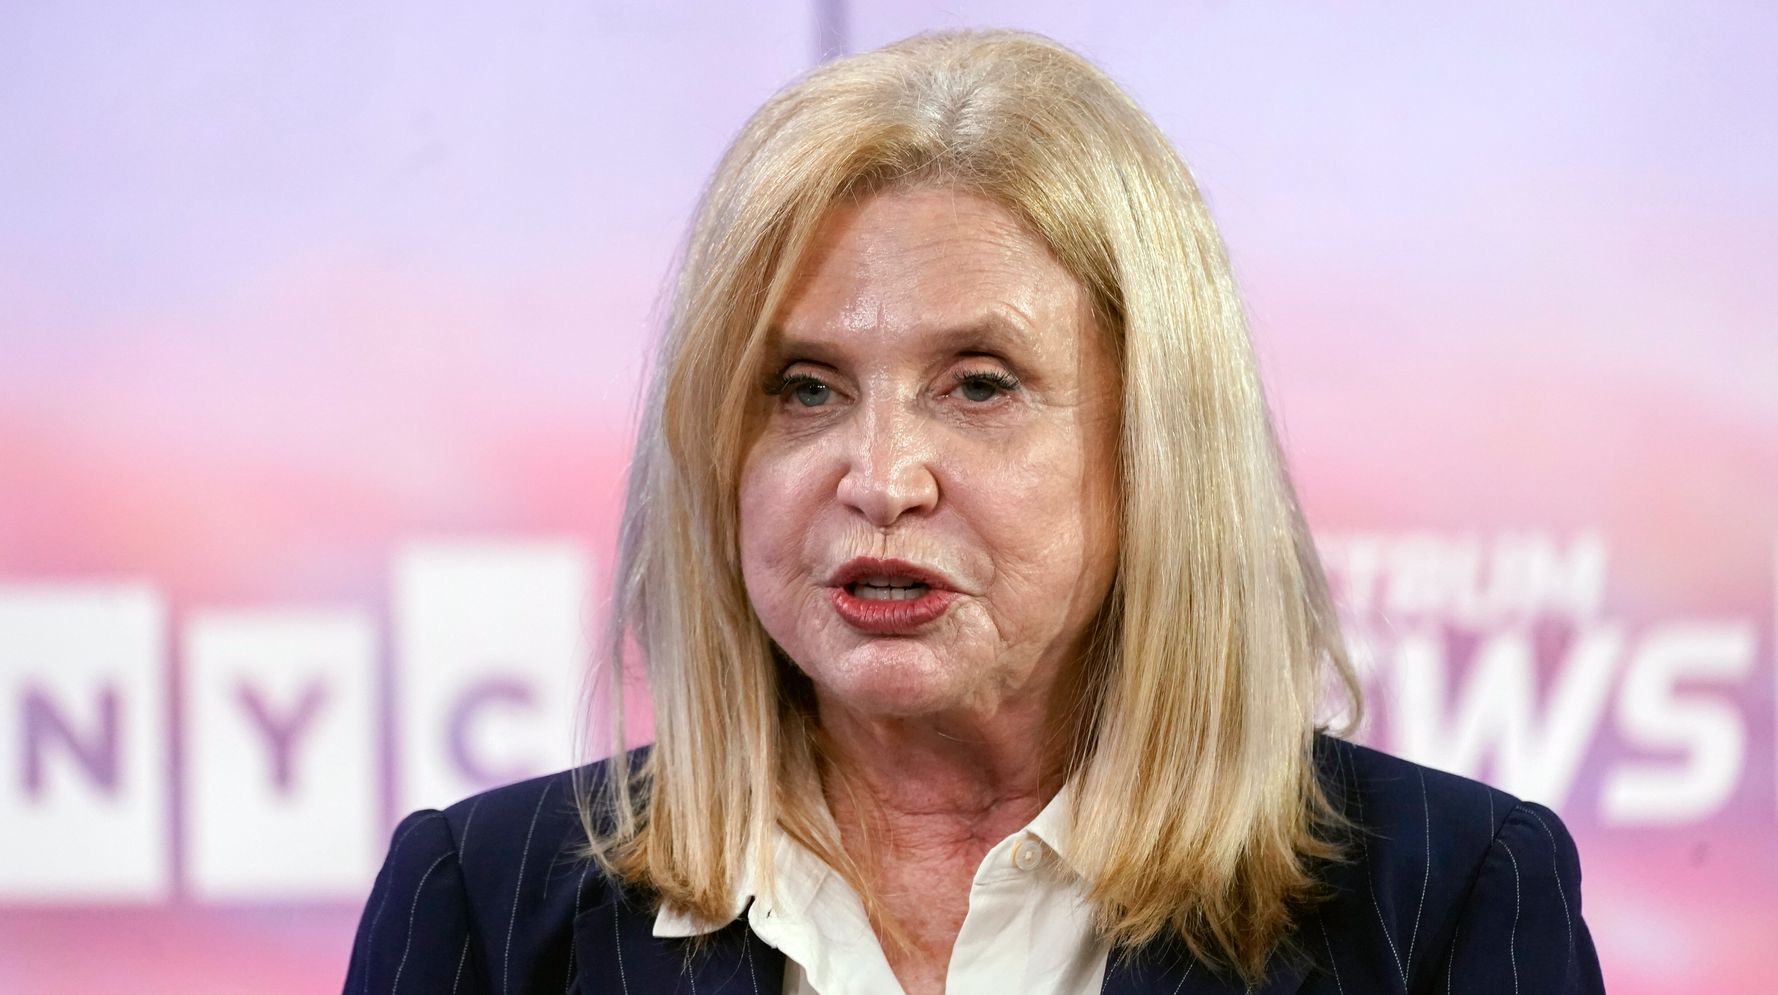 Democratic Rep. Carolyn Maloney Expresses 'Regret' For Past Vaccine Skepticism